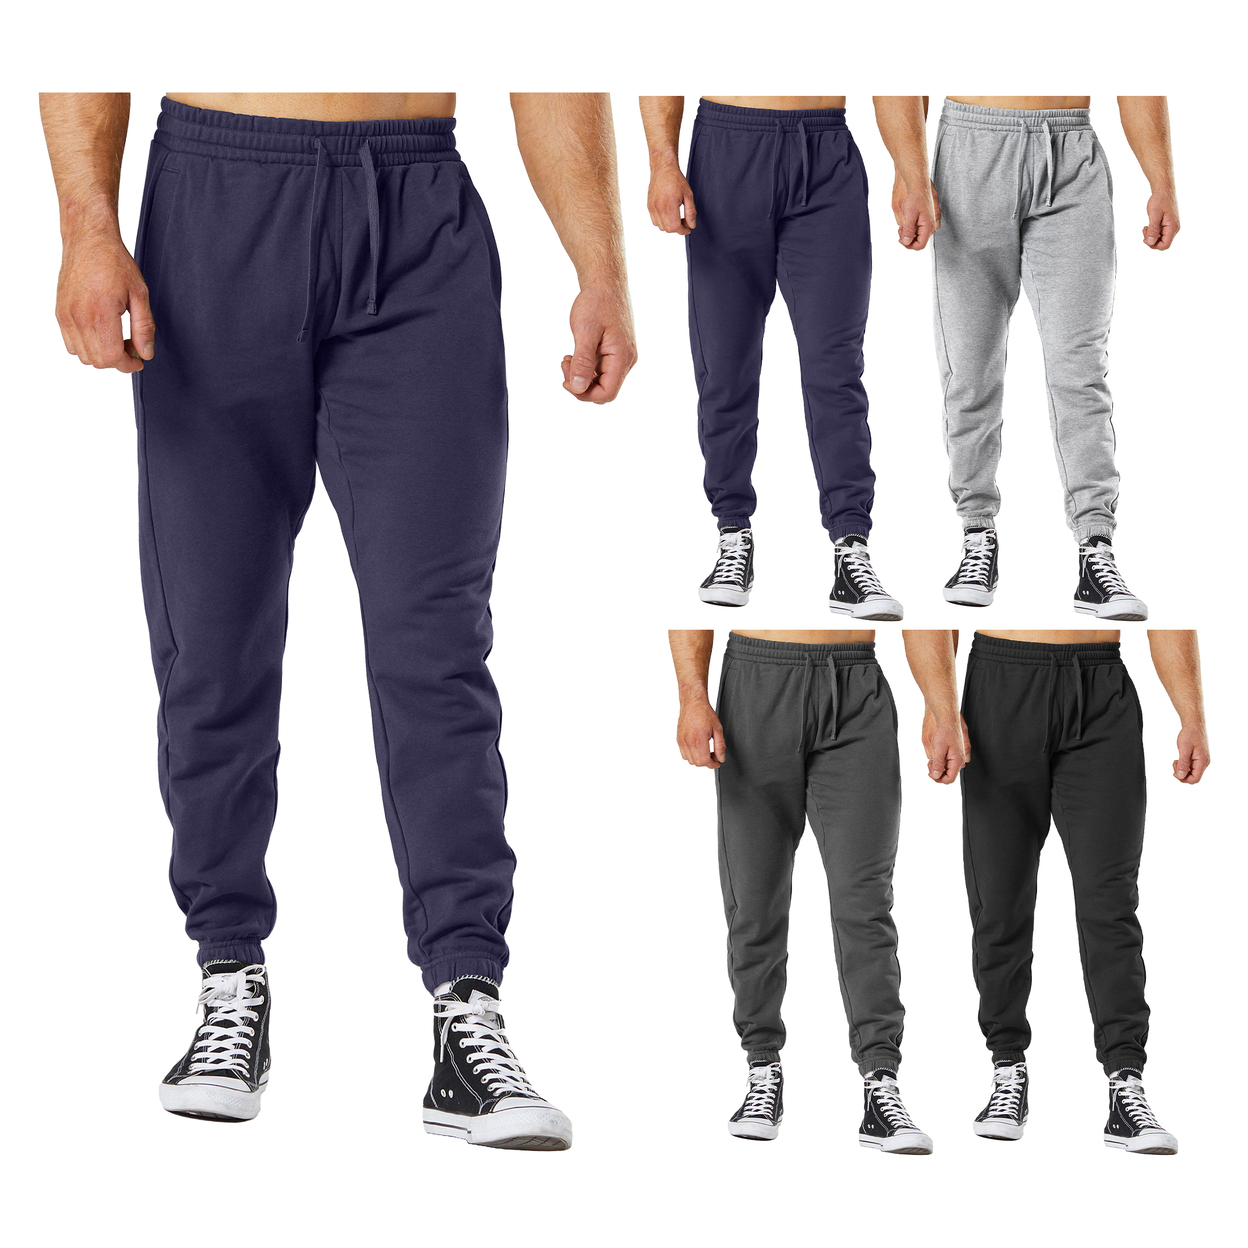 3-Pack: Men's Ultra-Soft Cozy Winter Warm Casual Fleece-Lined Sweatpants Jogger - Small